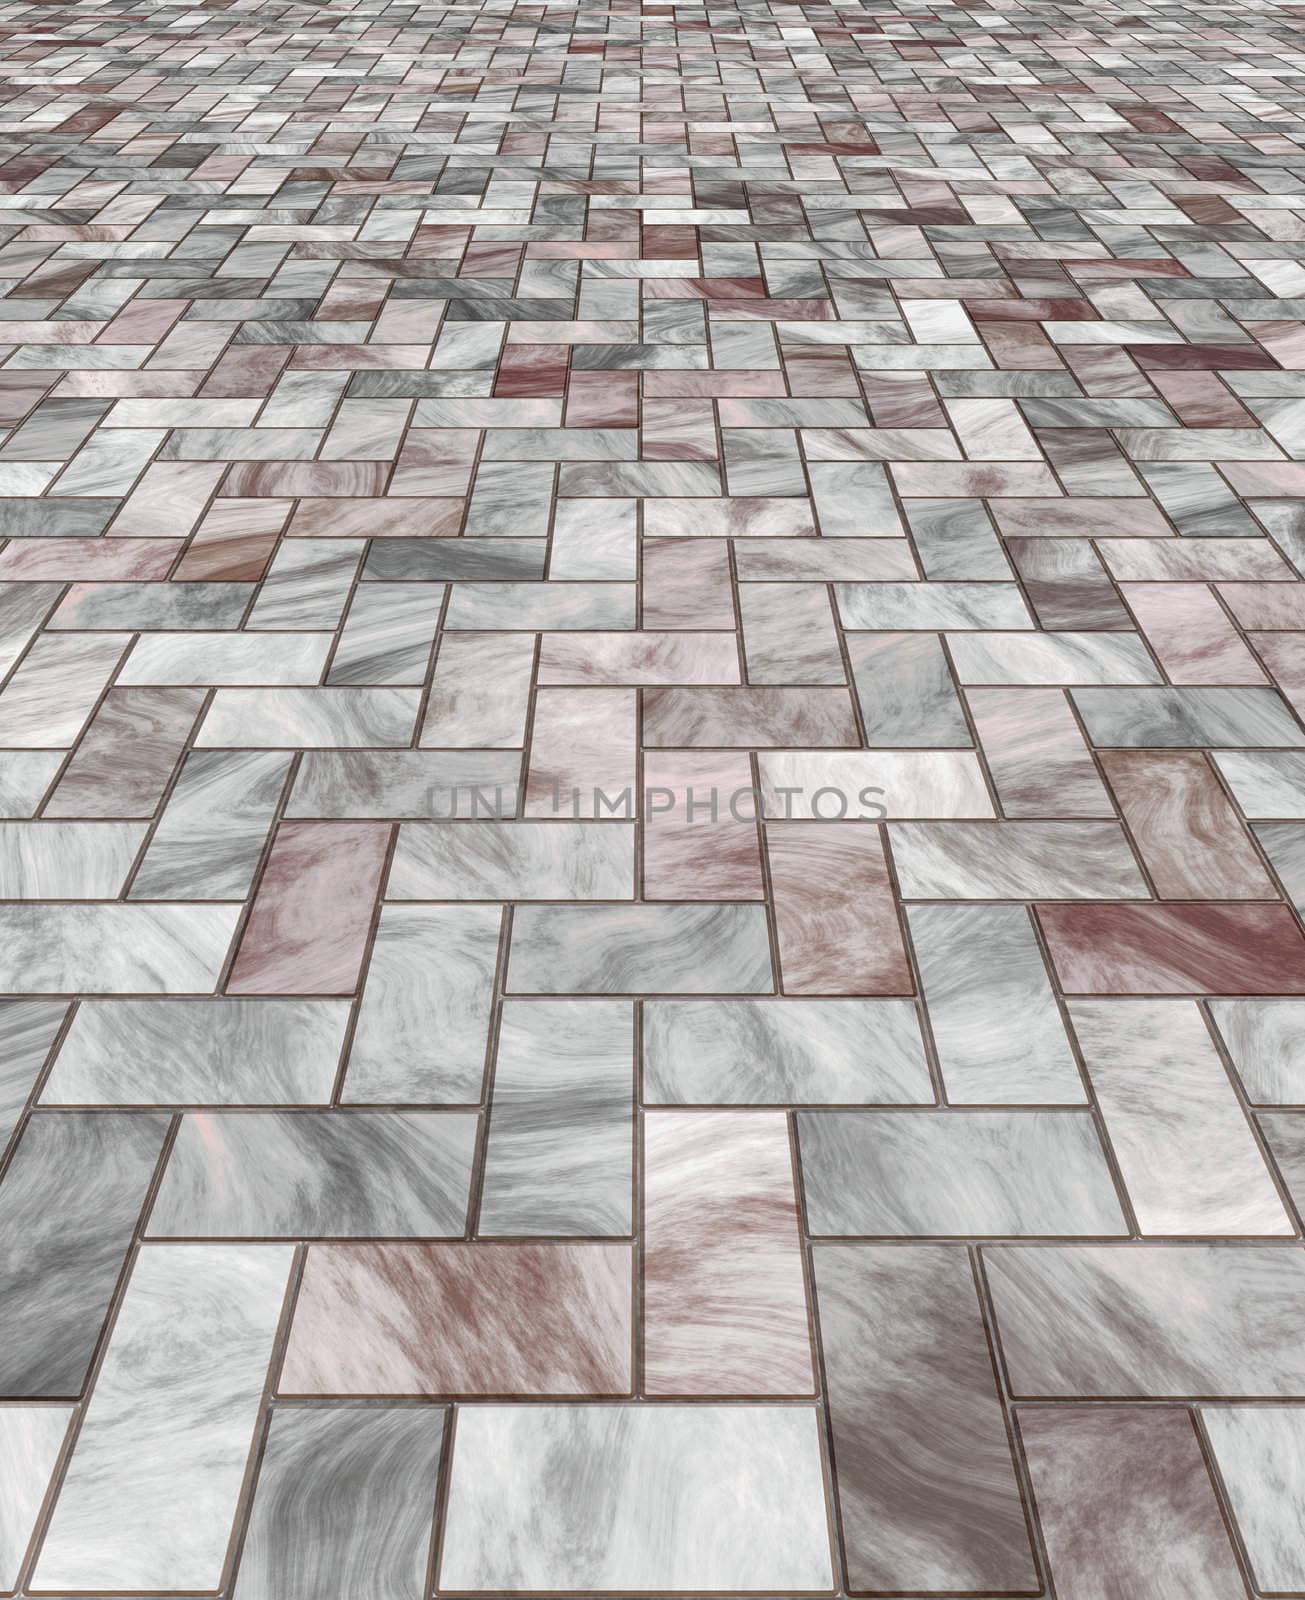 paved floor by clearviewstock